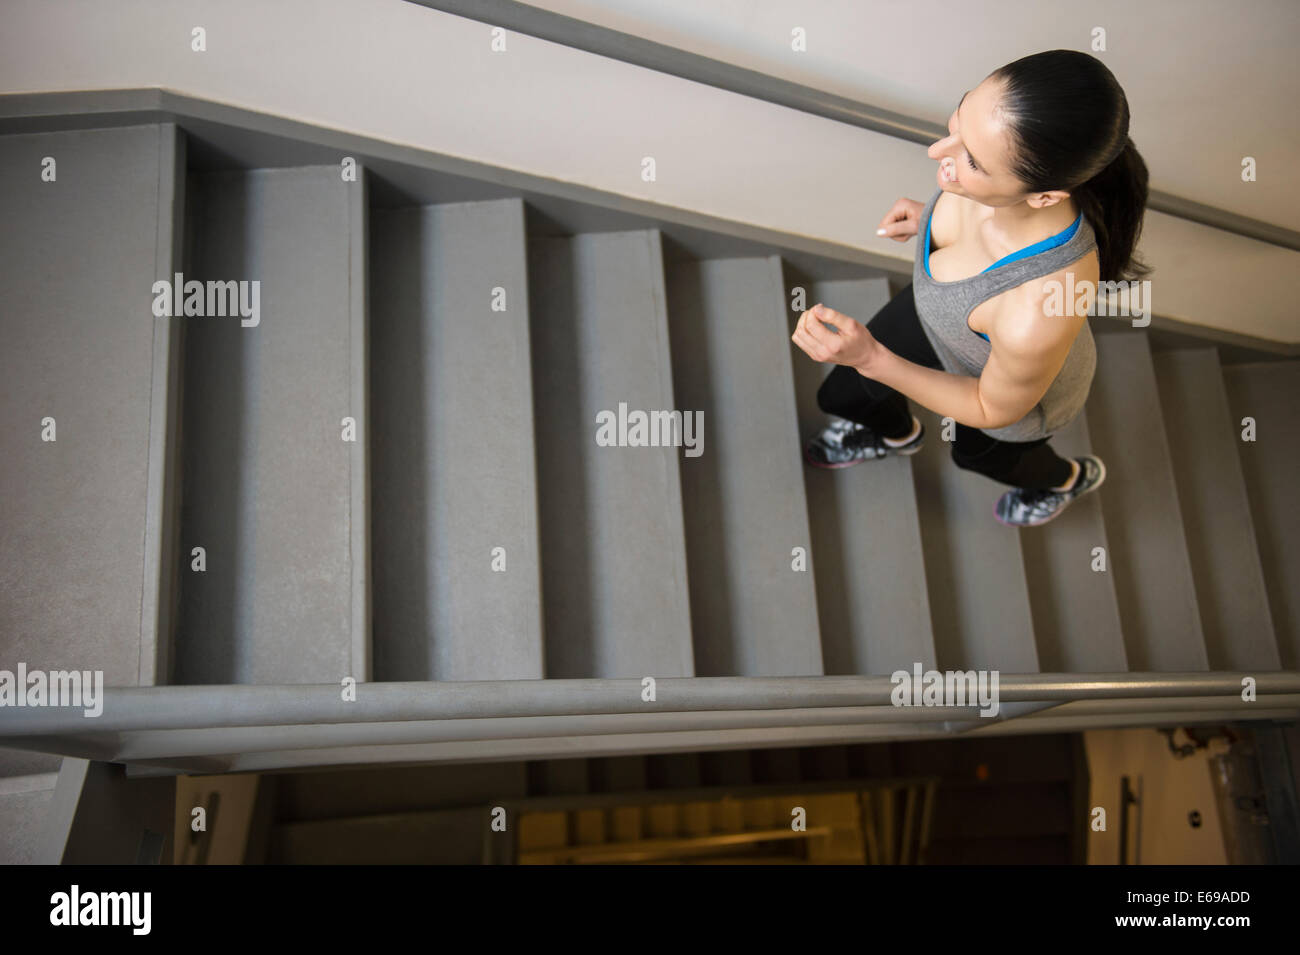 Caucasian woman running up stairs Banque D'Images